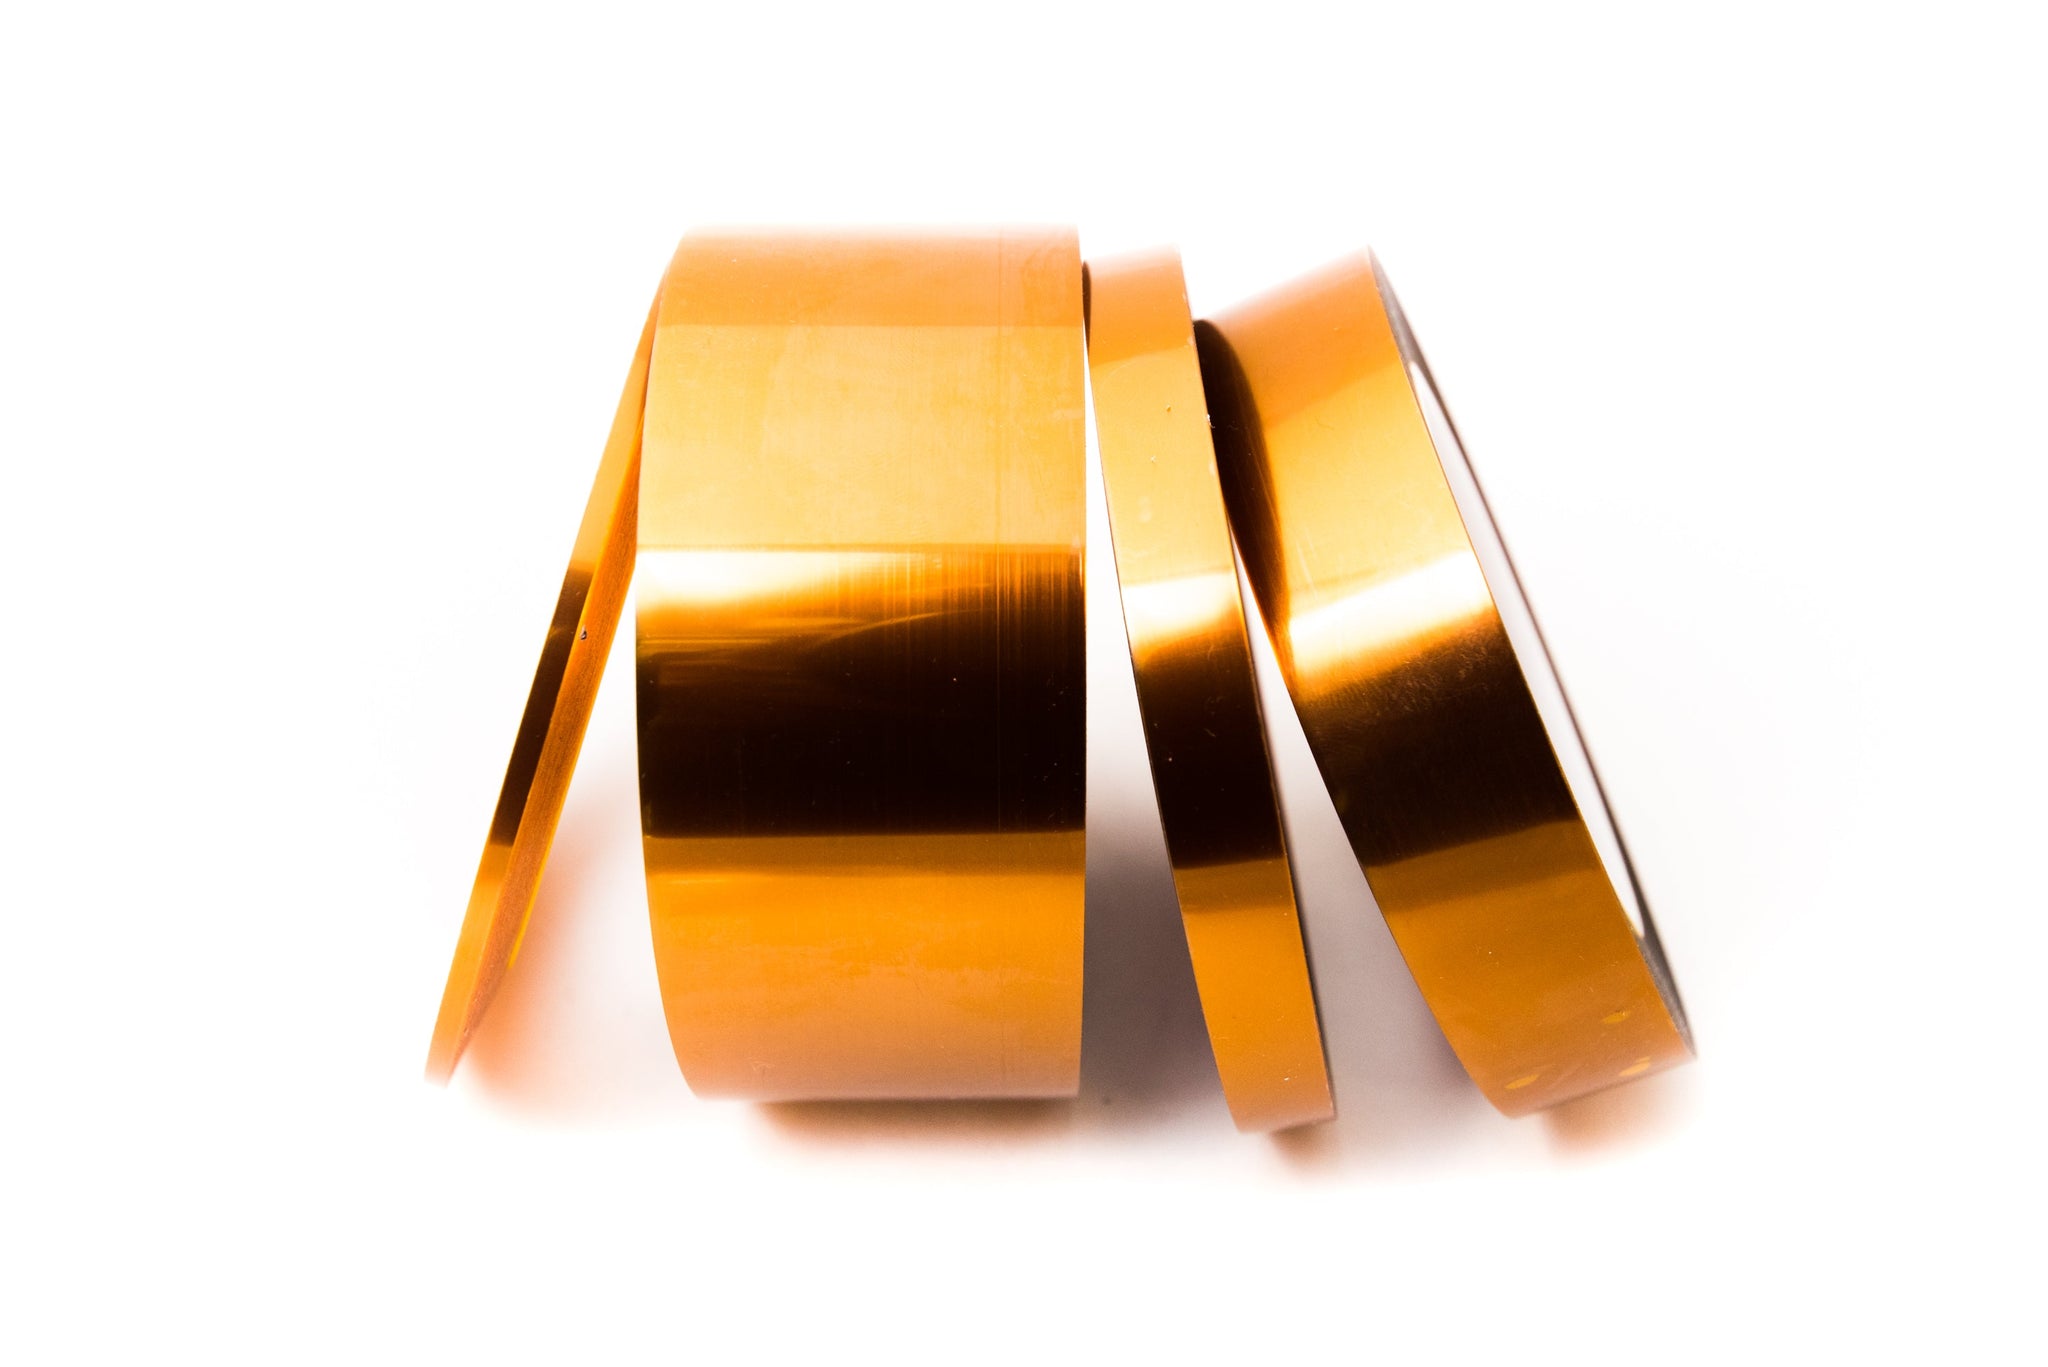 2 Mil Kapton Tape - 2 1/2 x 36 Yds - Tapes Master Polyimide High  Temperature Tape with Silicone Adhesive - 3” Core